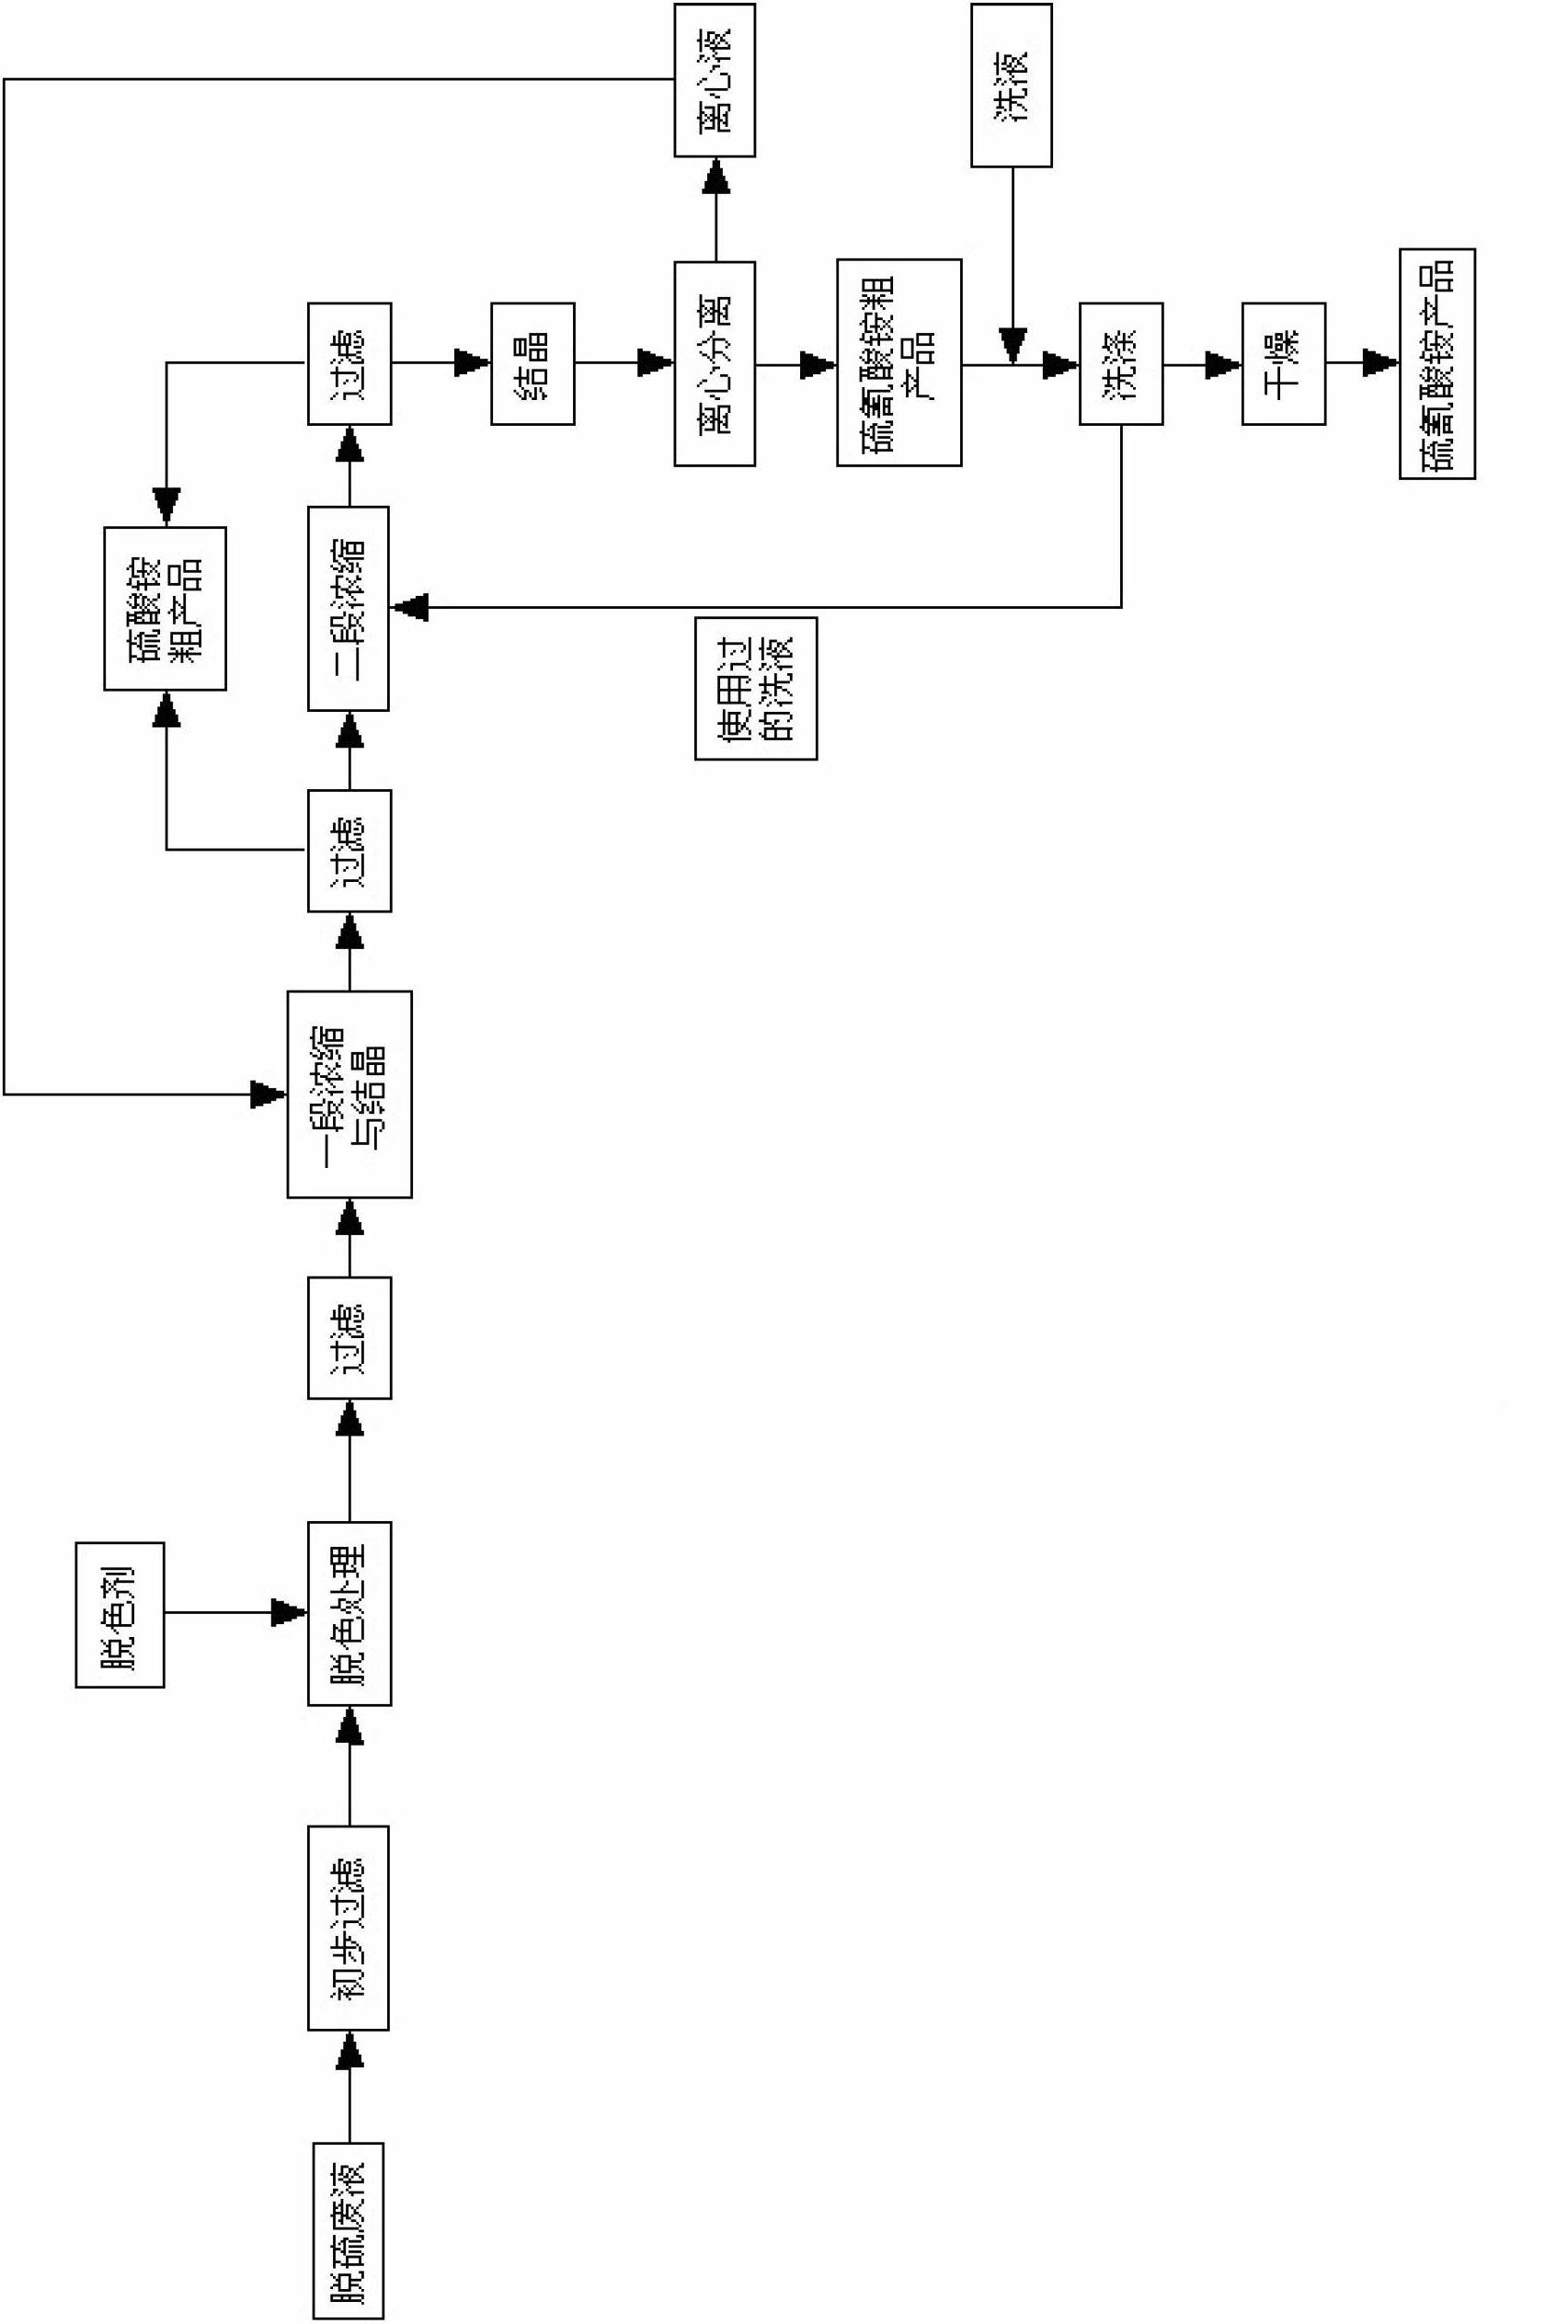 Method for recovering ammonium sulfate and ammonium thiocyanate from desulfuration waste liquor